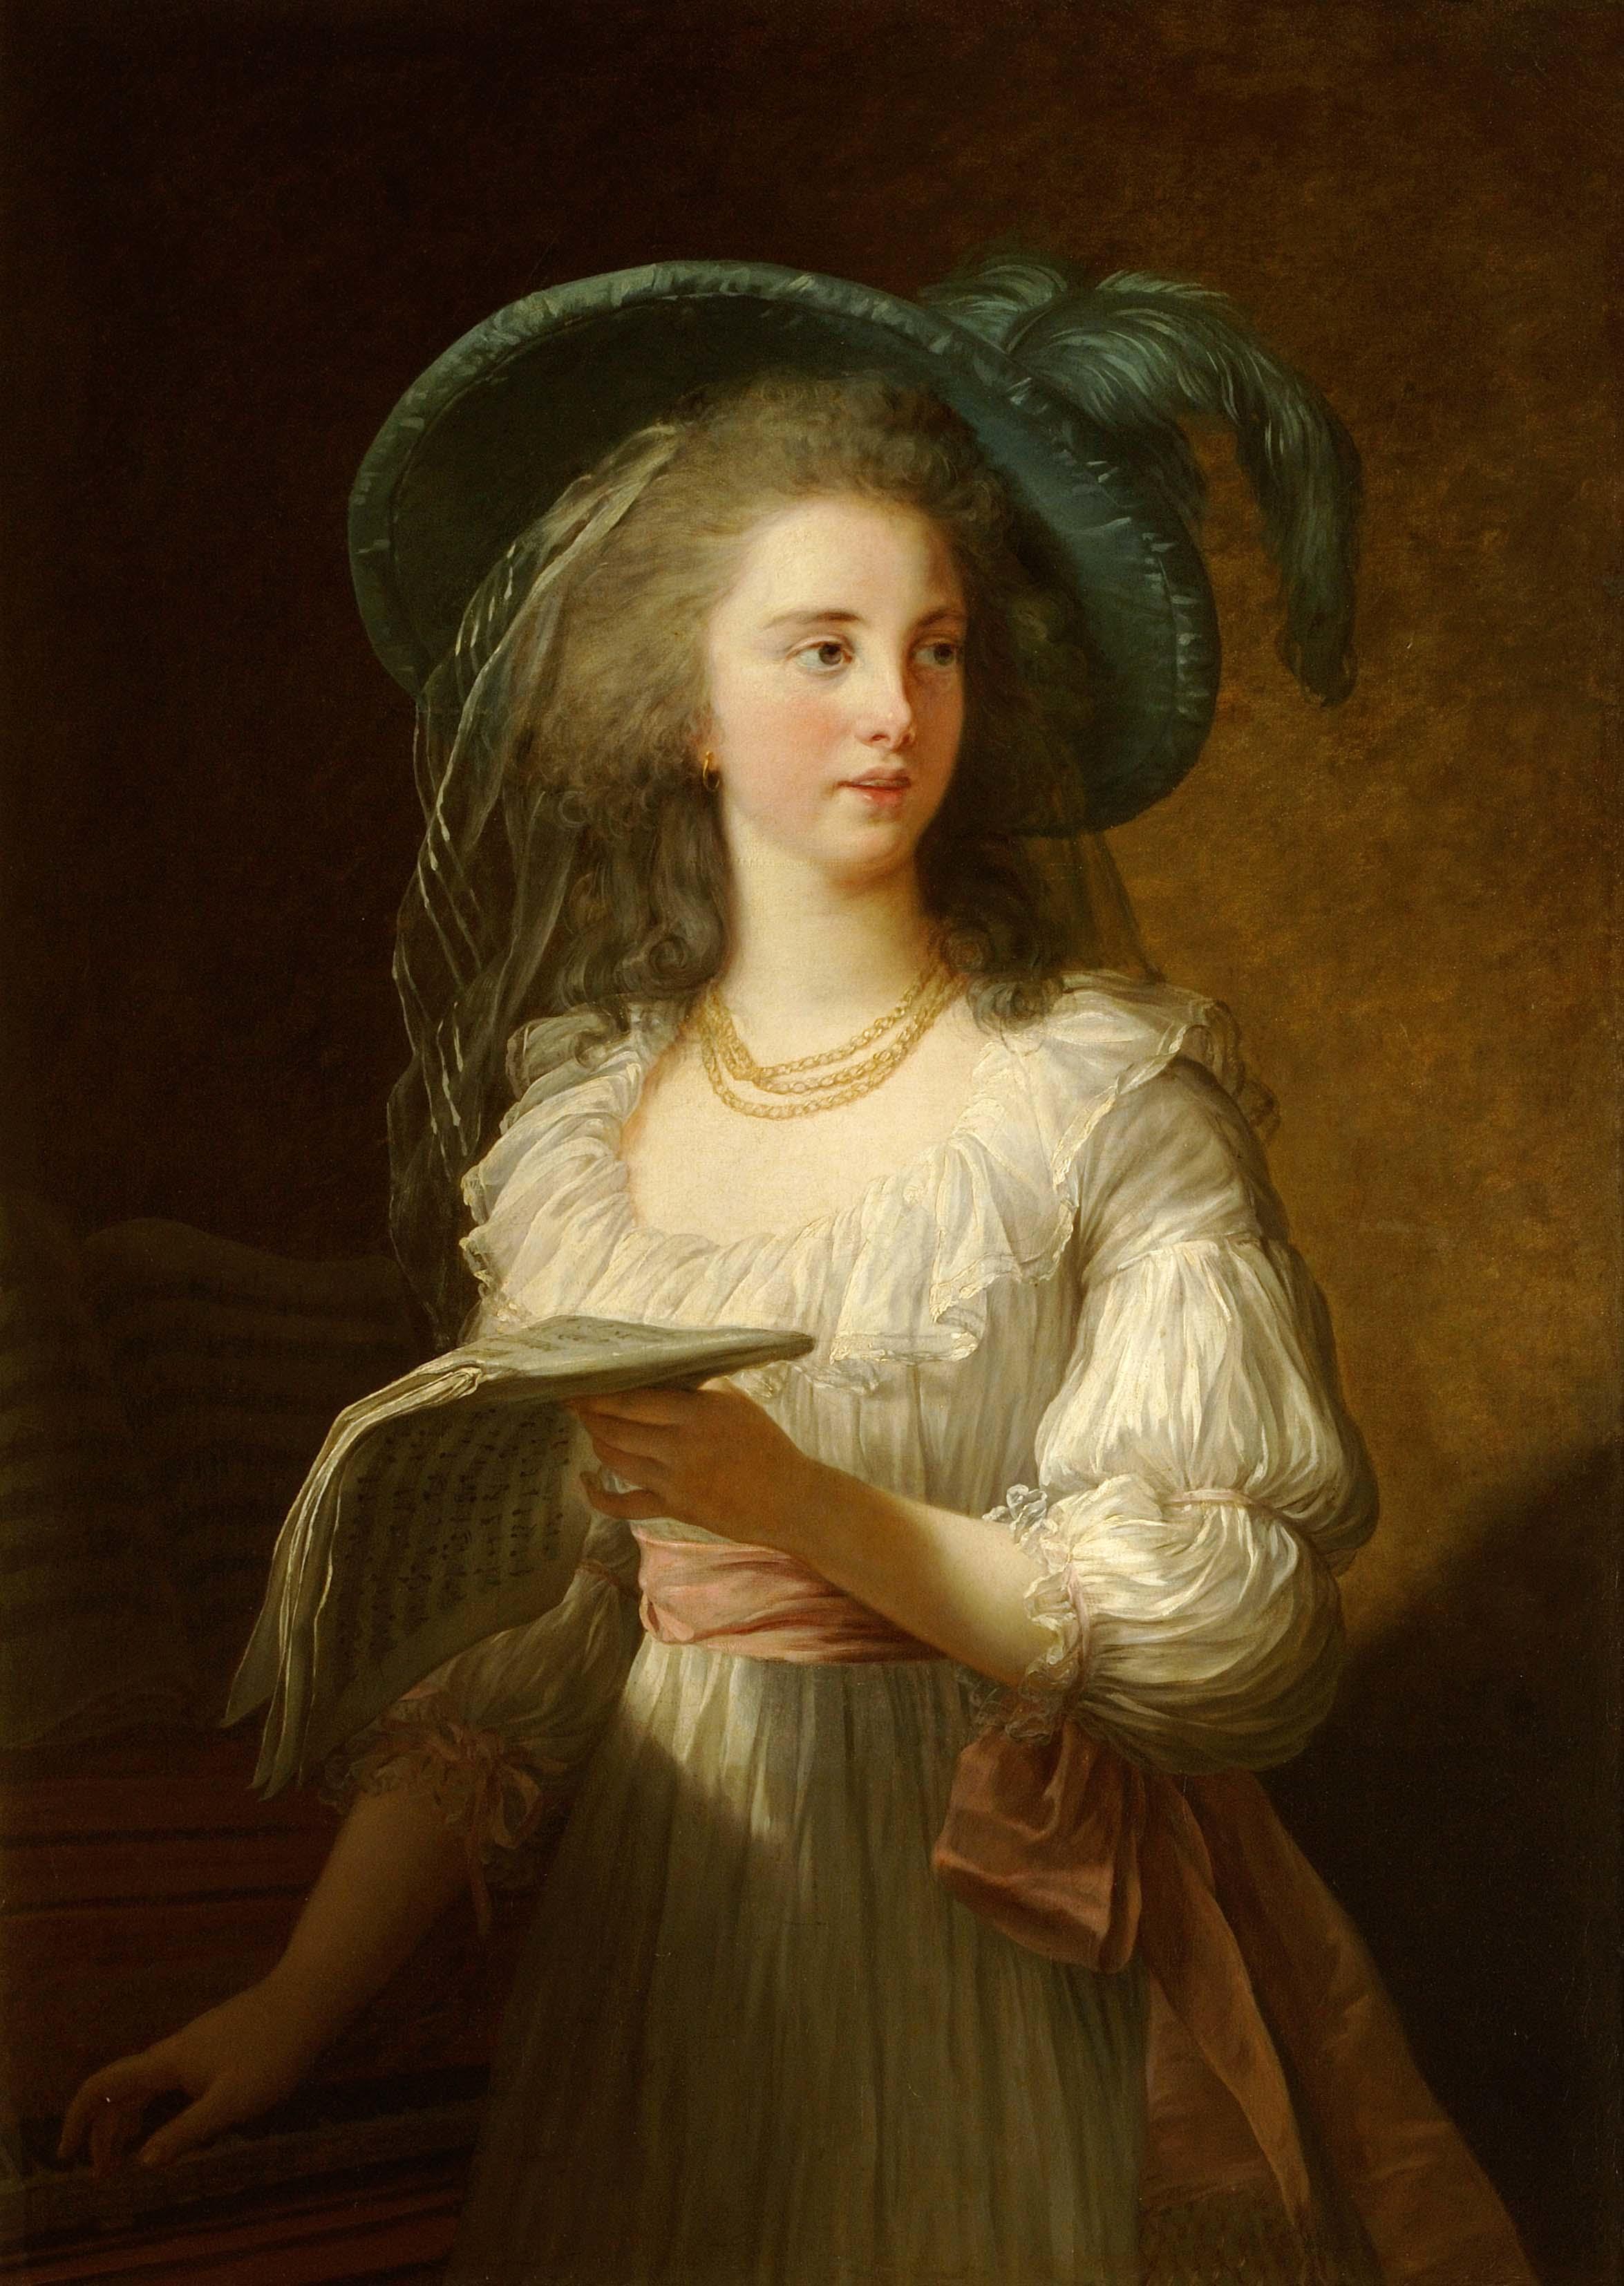 Portrait of a woman, standing, holding a book